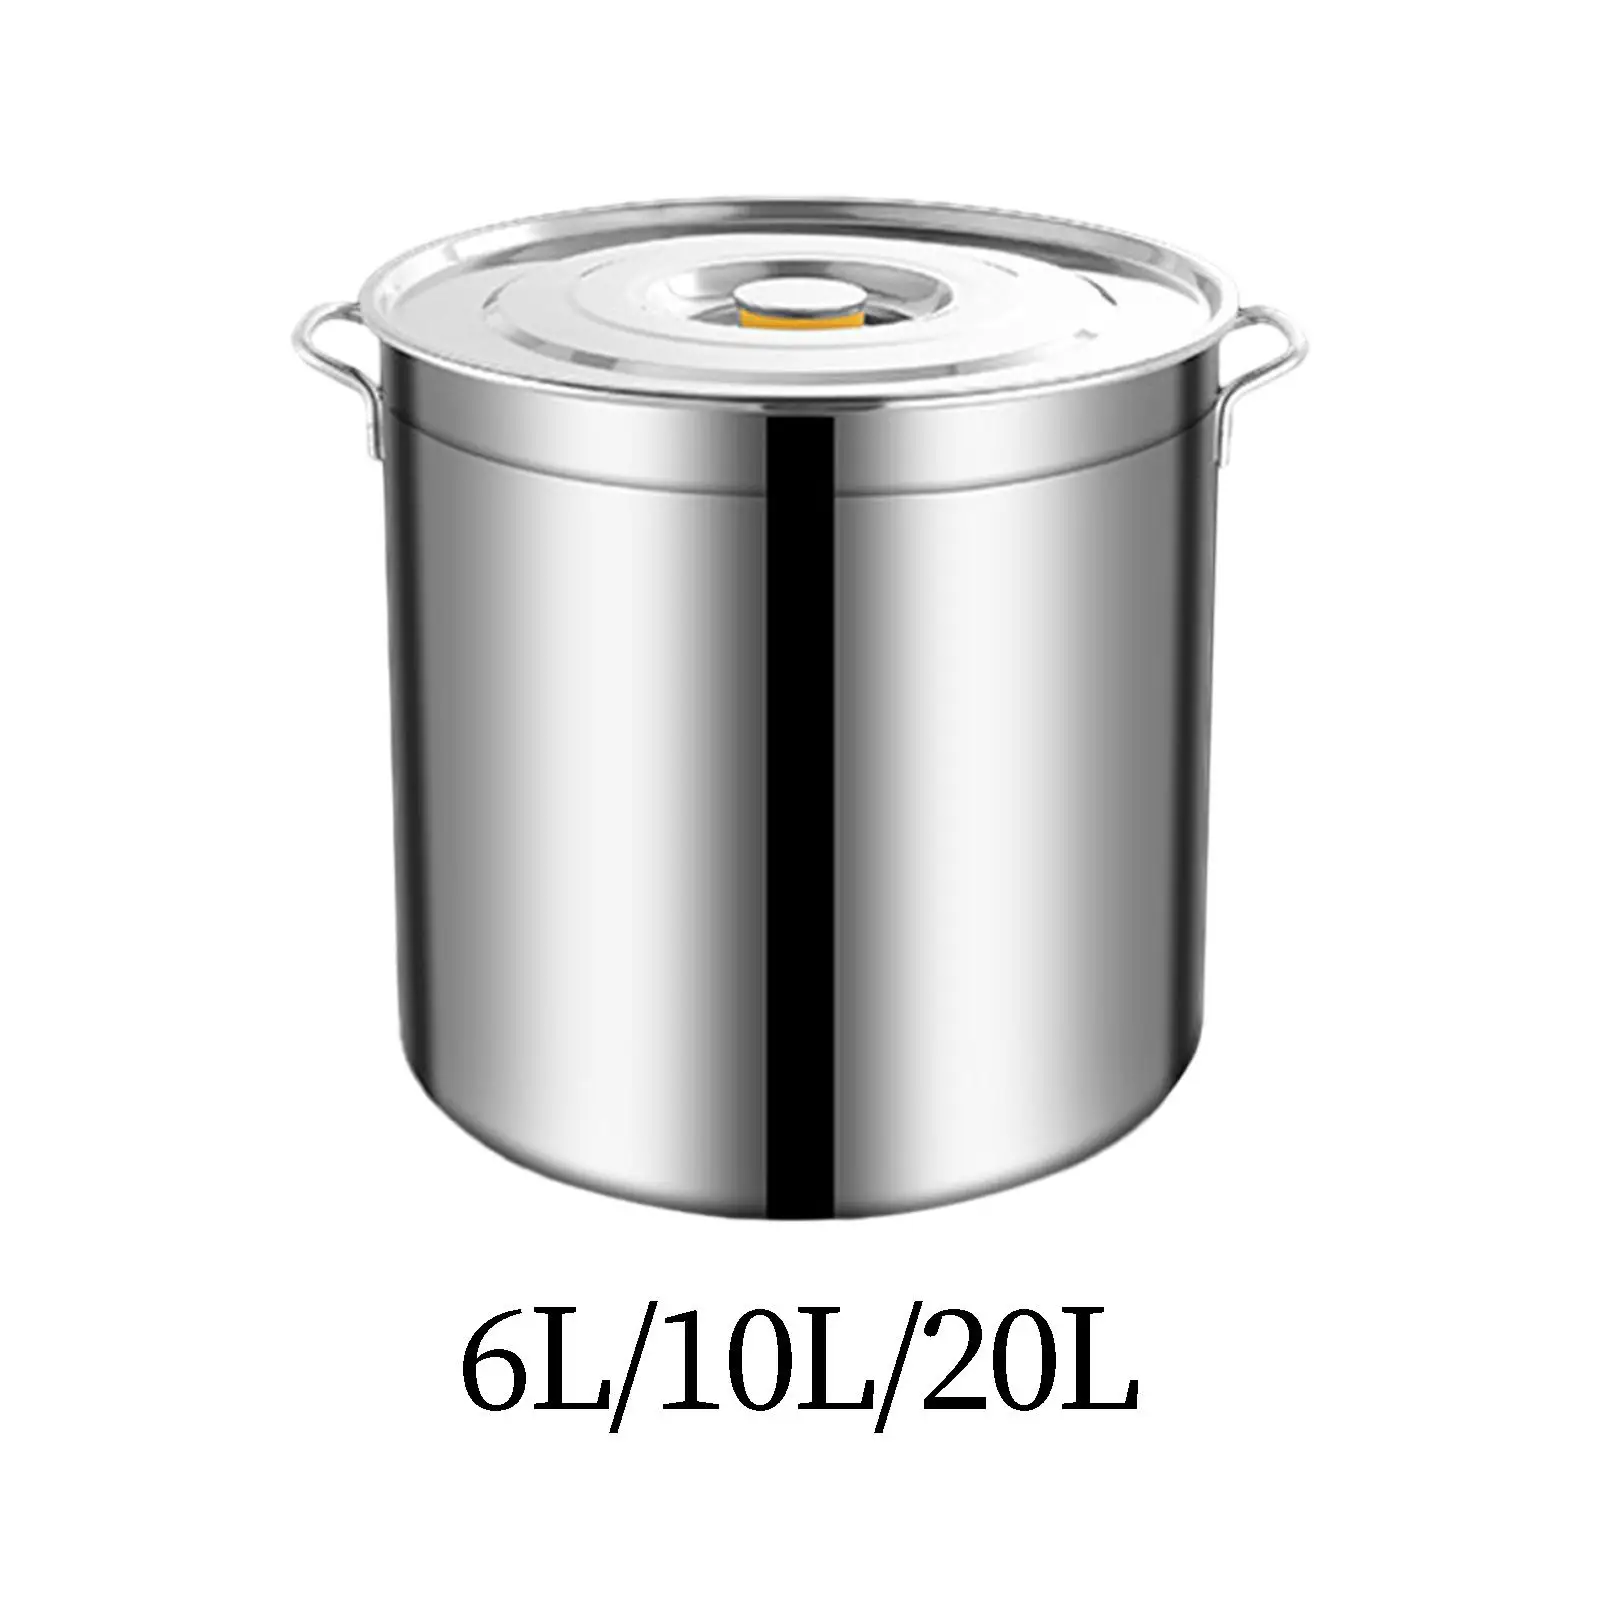 Stainless Steel Stockpot Oil Bucket for Boiling Strew Simmer Heavy Duty Large Soup Pot for Hotel Household Commercial Canteens